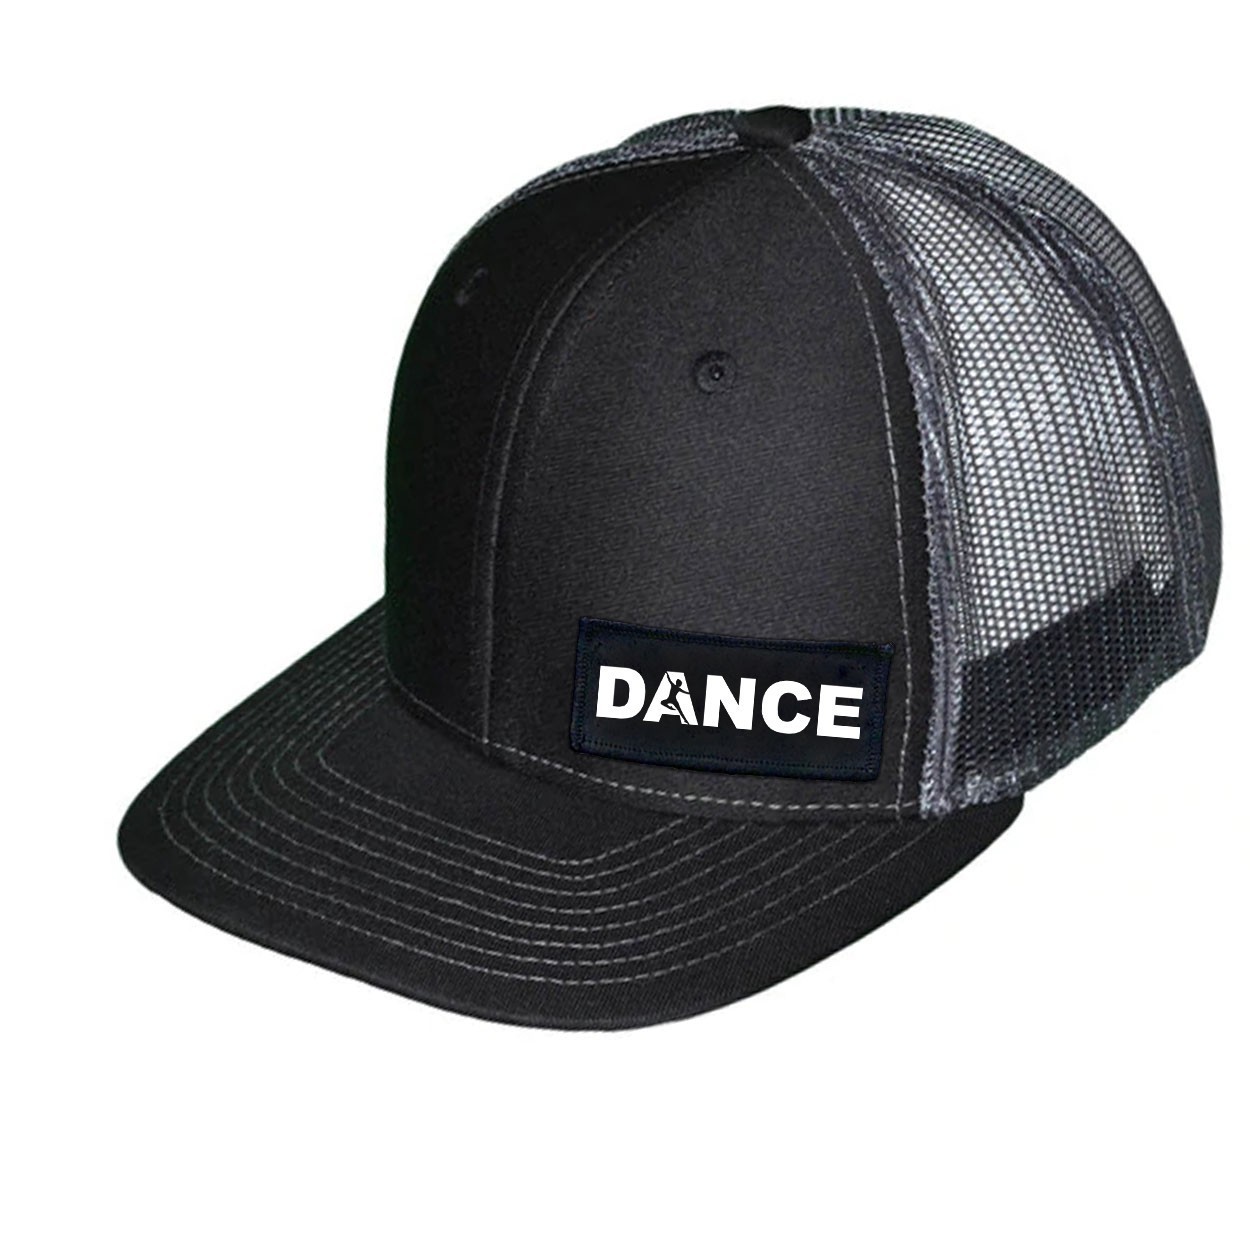 Dance Silhouette Logo Night Out Woven Patch Snapback Trucker Hat Black/Charcoal (White Logo)